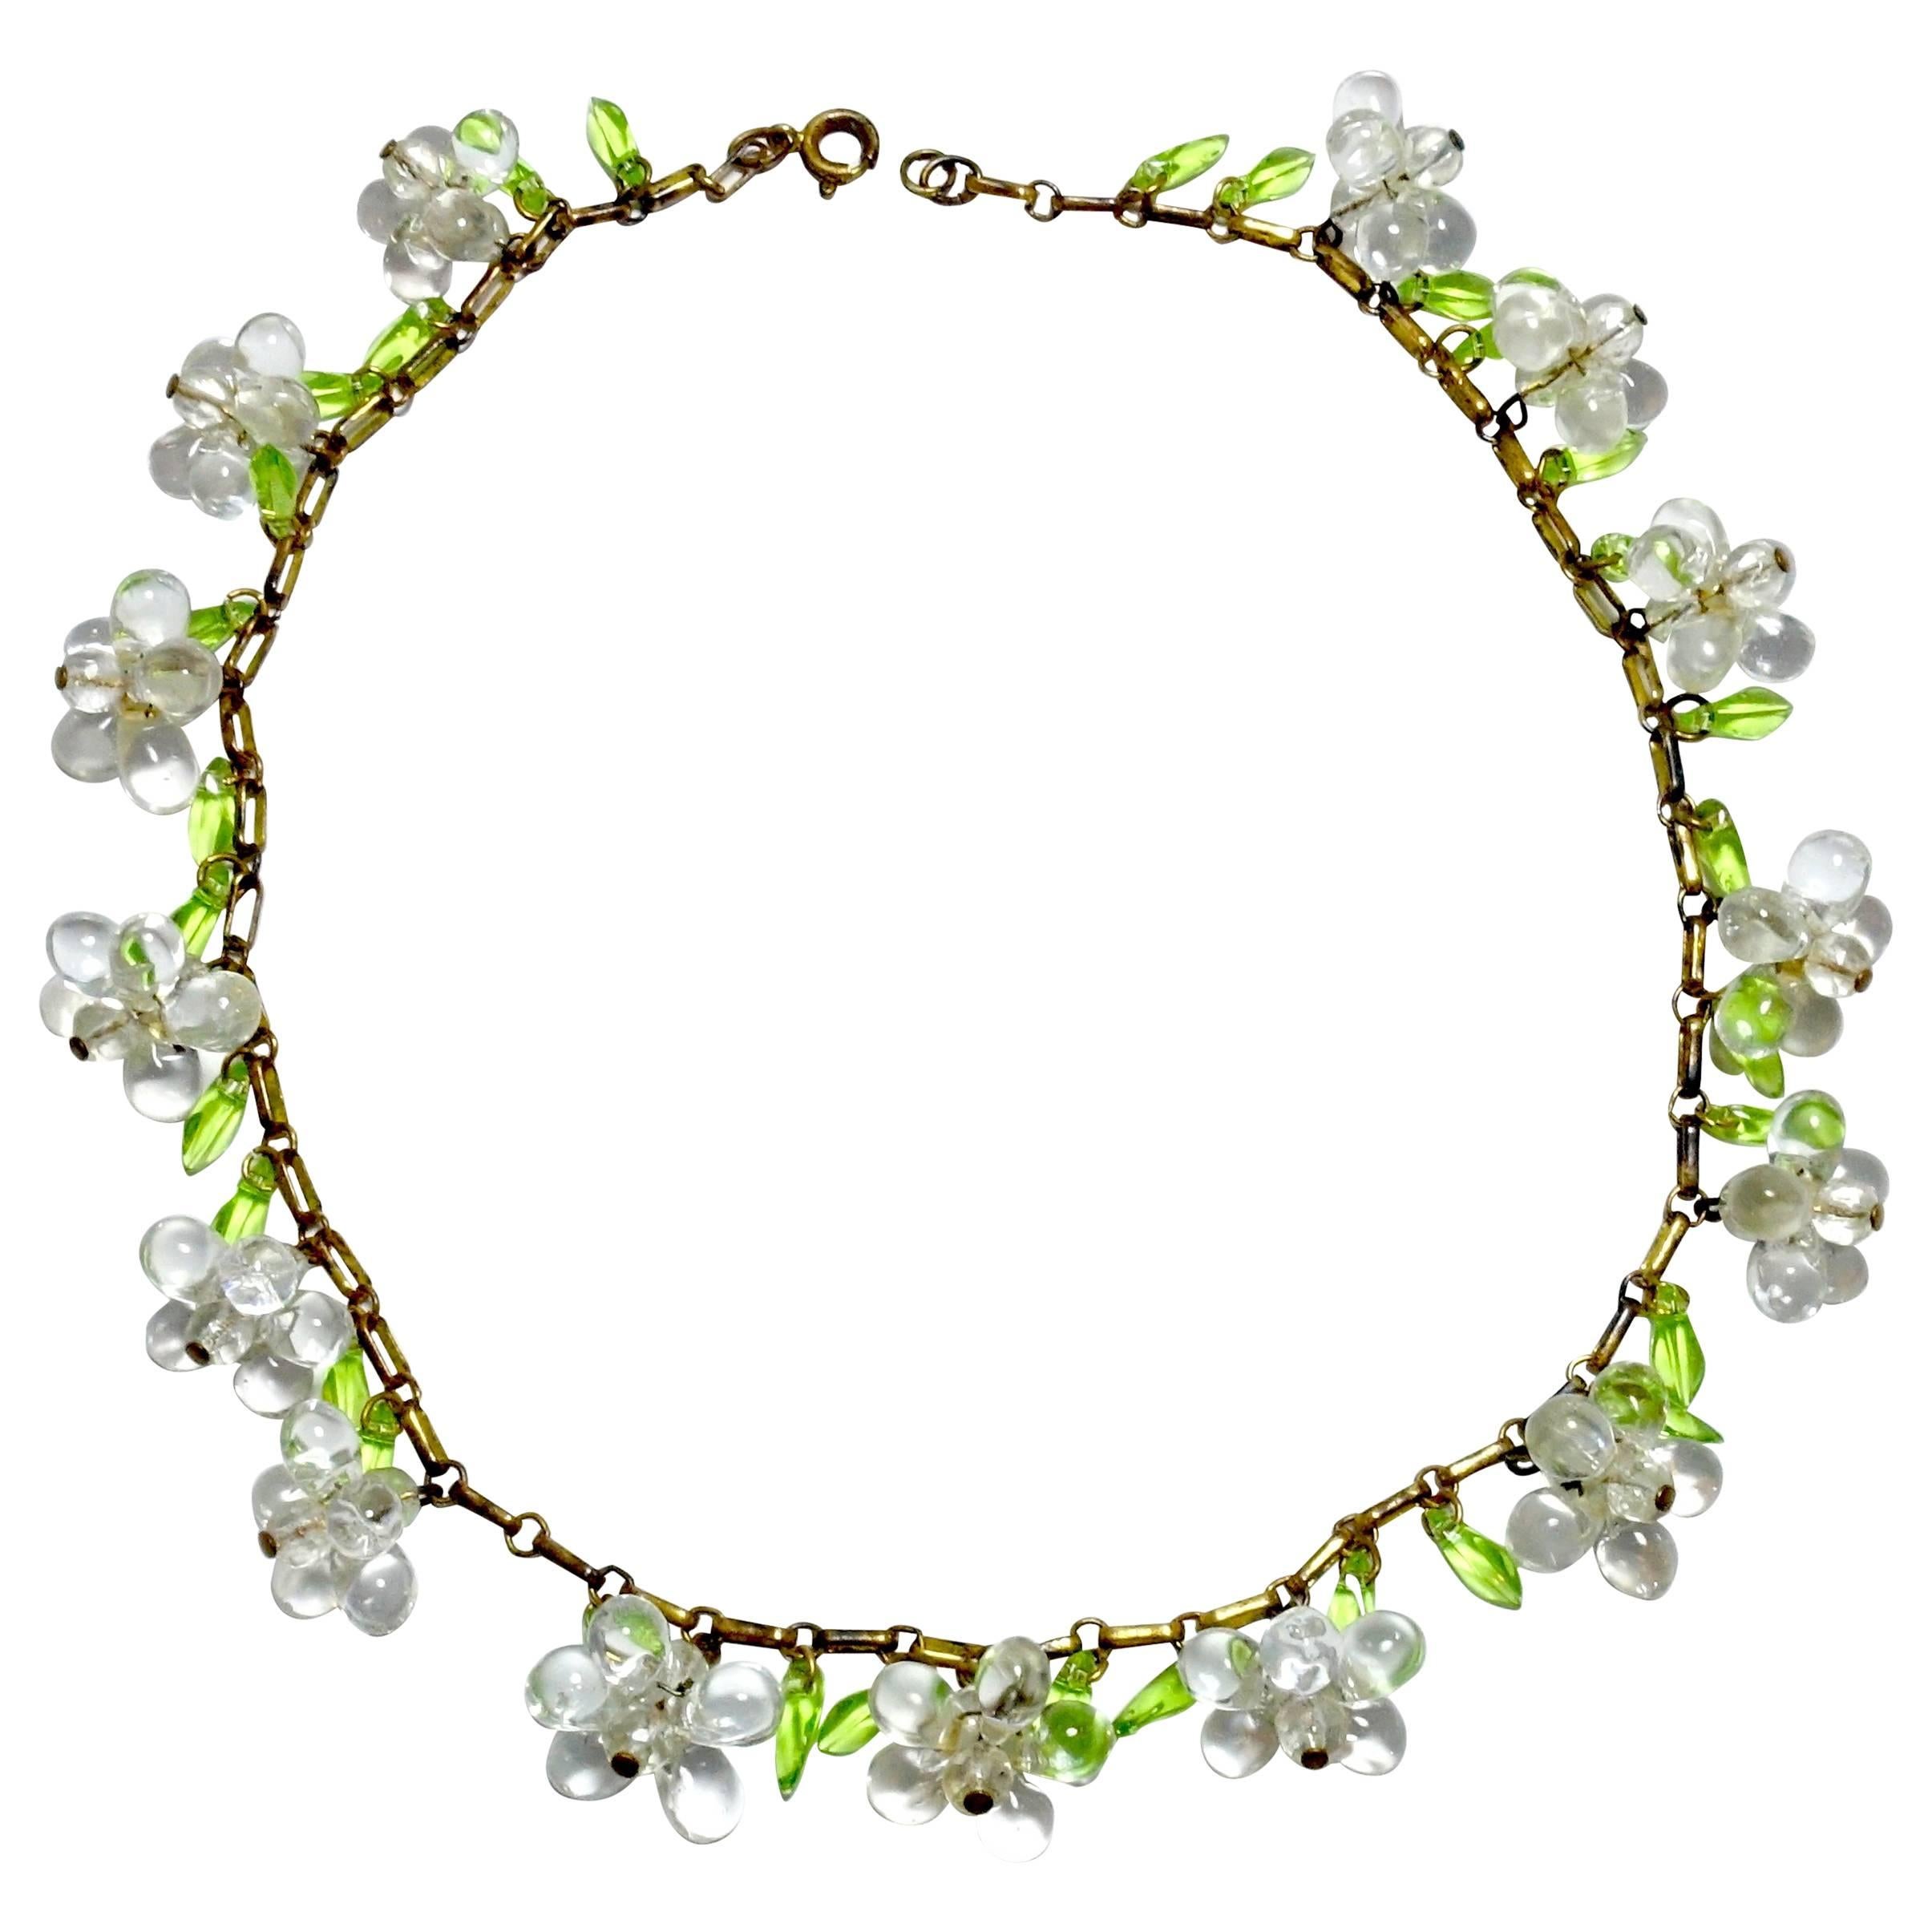 Vintage 1930s Early Haskell Glass Floral Necklace